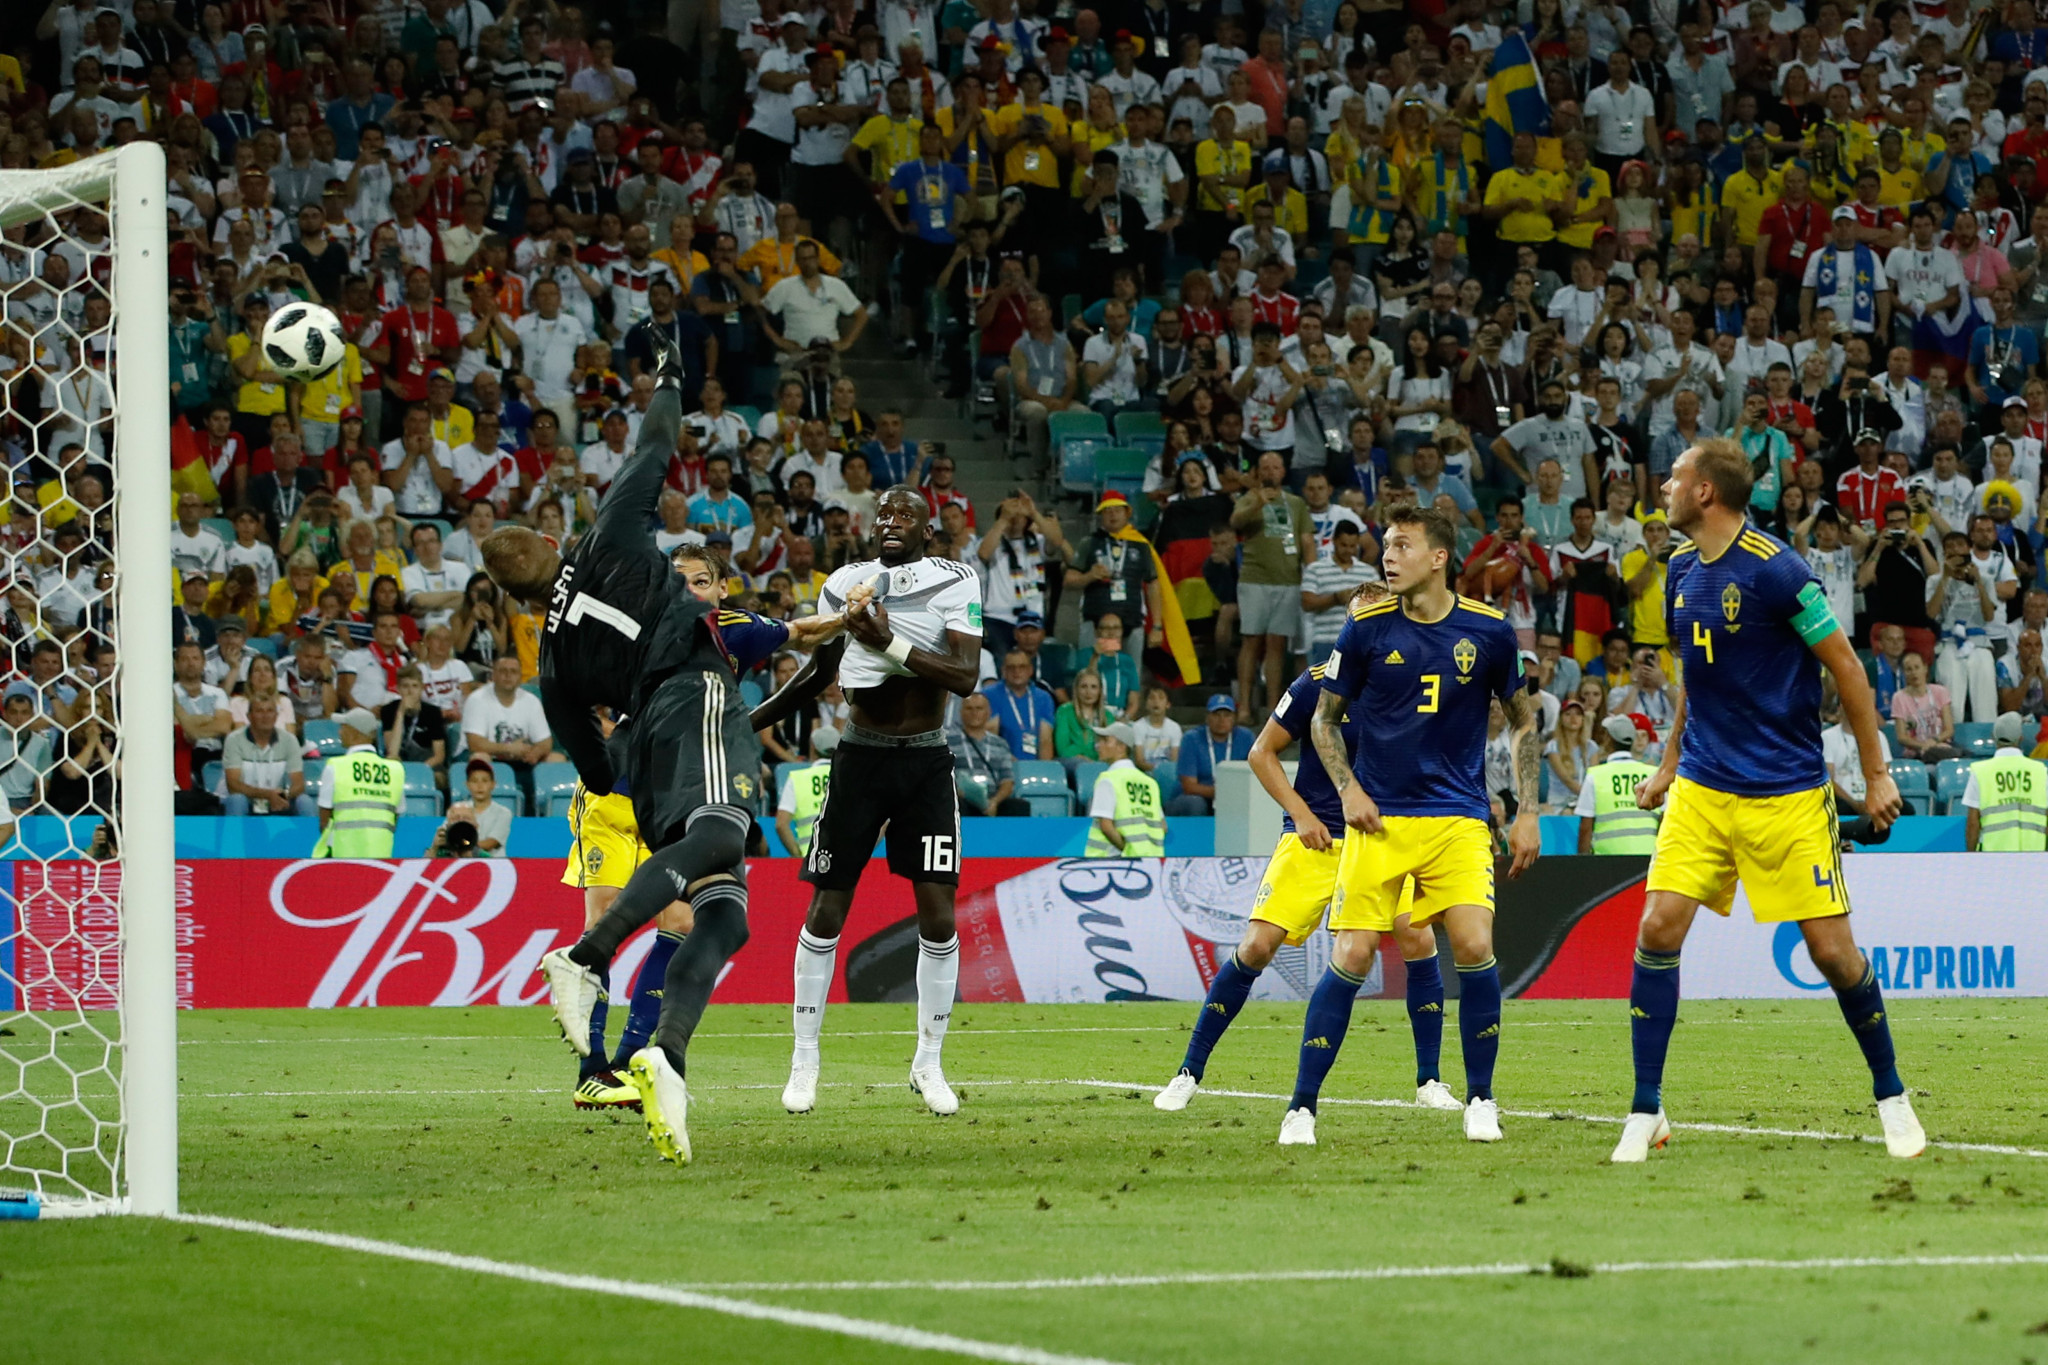 A late Toni Kroos free kick gave defending champions Germany a crucial win over Sweden ©Getty Images